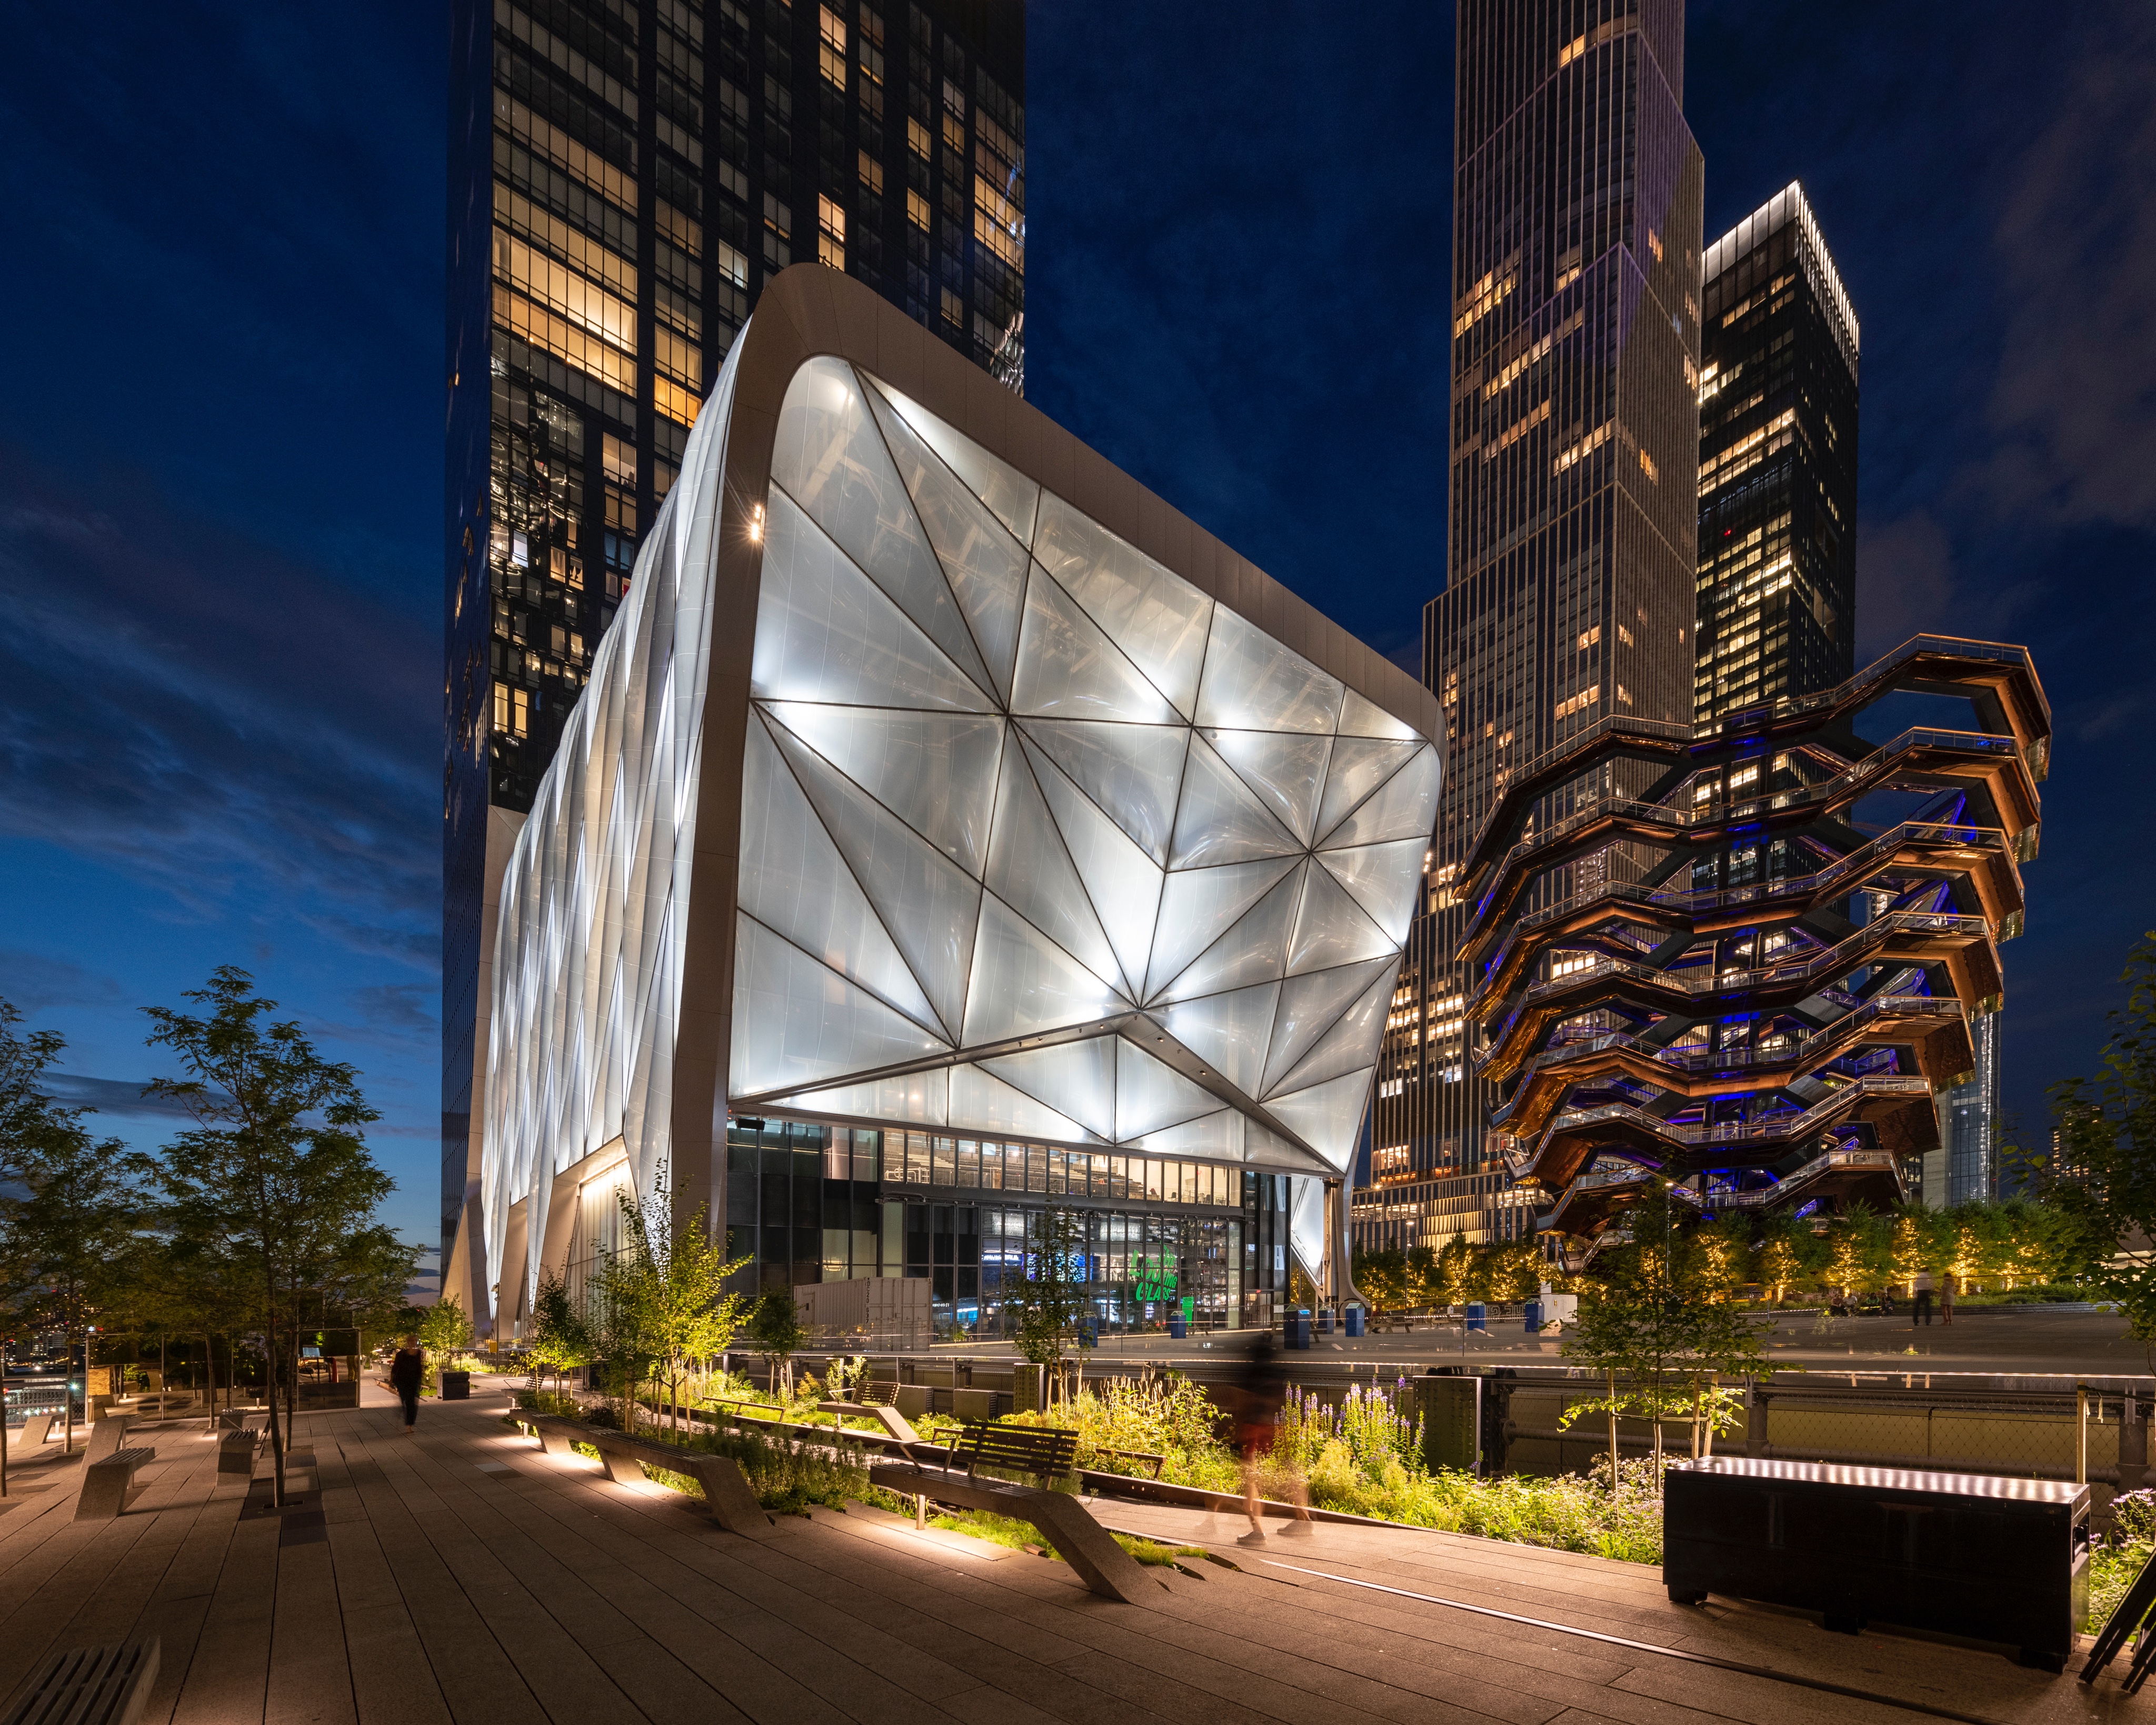 stor Lilla bytte rundt ERCO on Twitter: "The shape-shifting @TheShedNY: ERCO lights New York's  coolest cutting-edge cultural space with ERCO Grasshopper outdoor  projectors. #facadelighting https://t.co/w8HEQl0i26  https://t.co/dATAntktcS" / Twitter